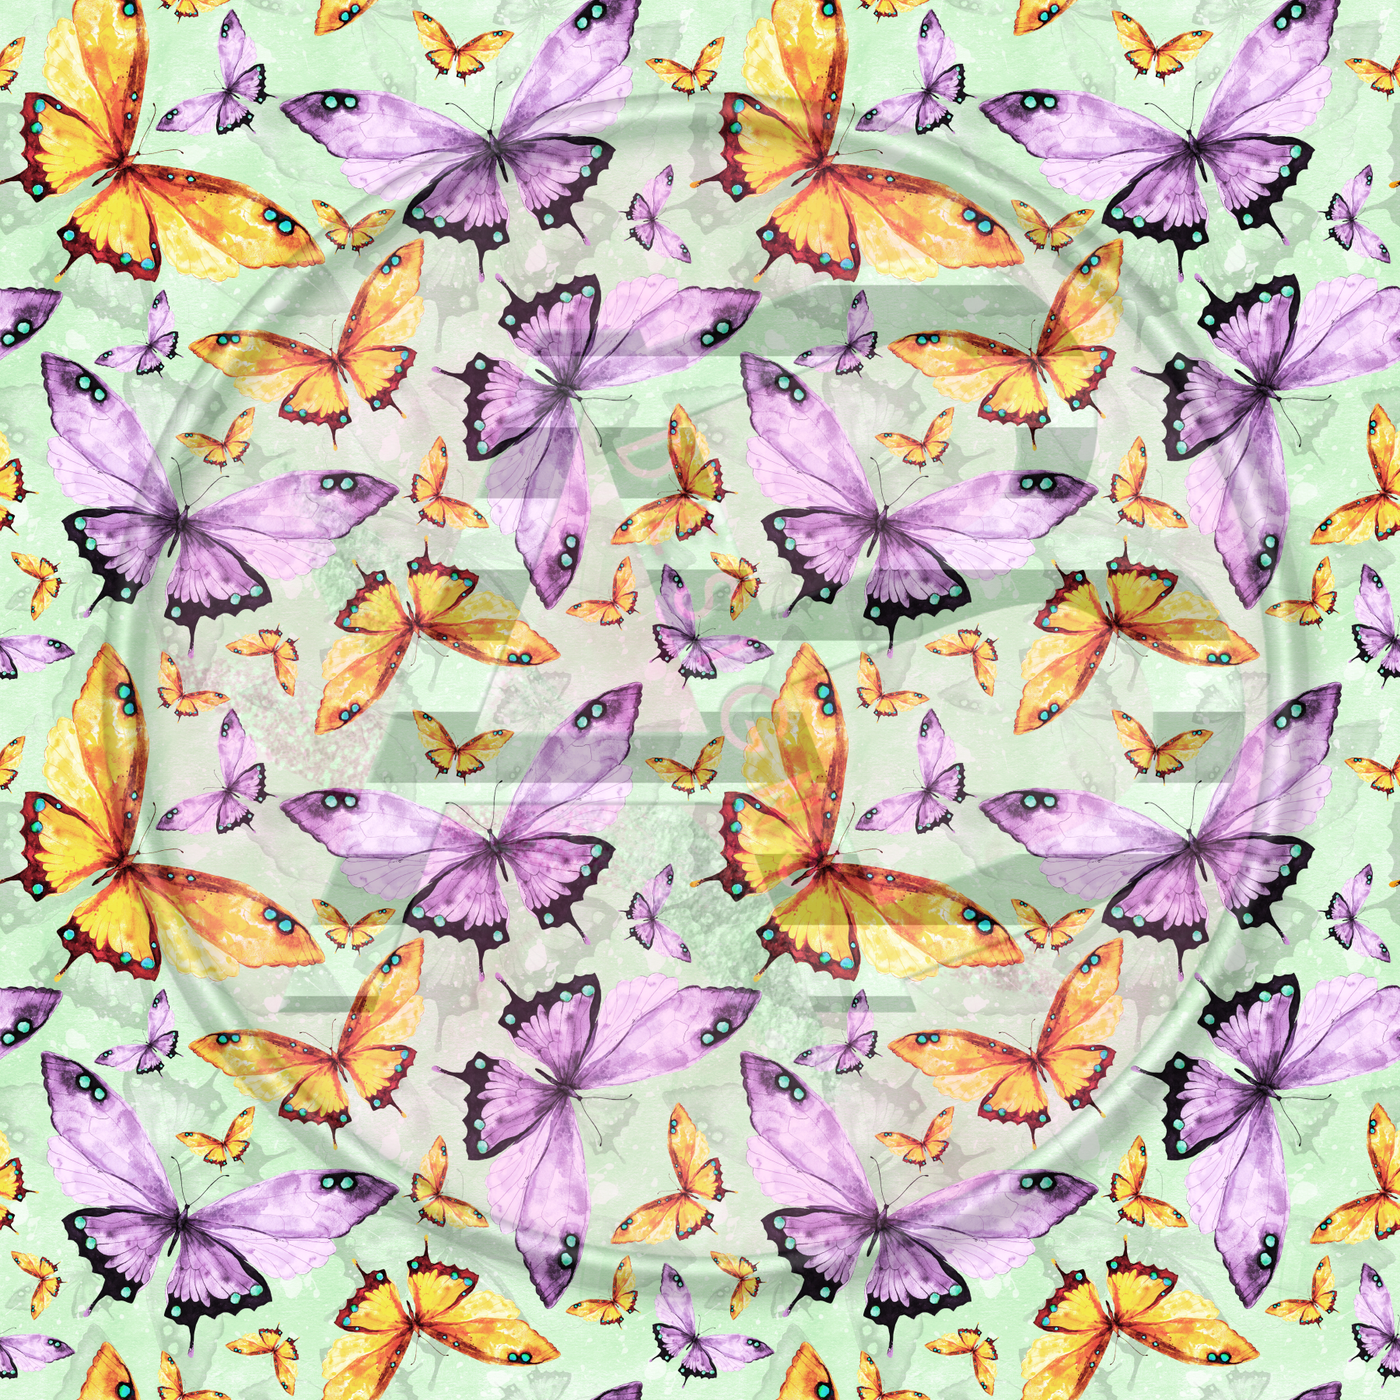 Adhesive Patterned Vinyl - Butterfly 09 Smaller